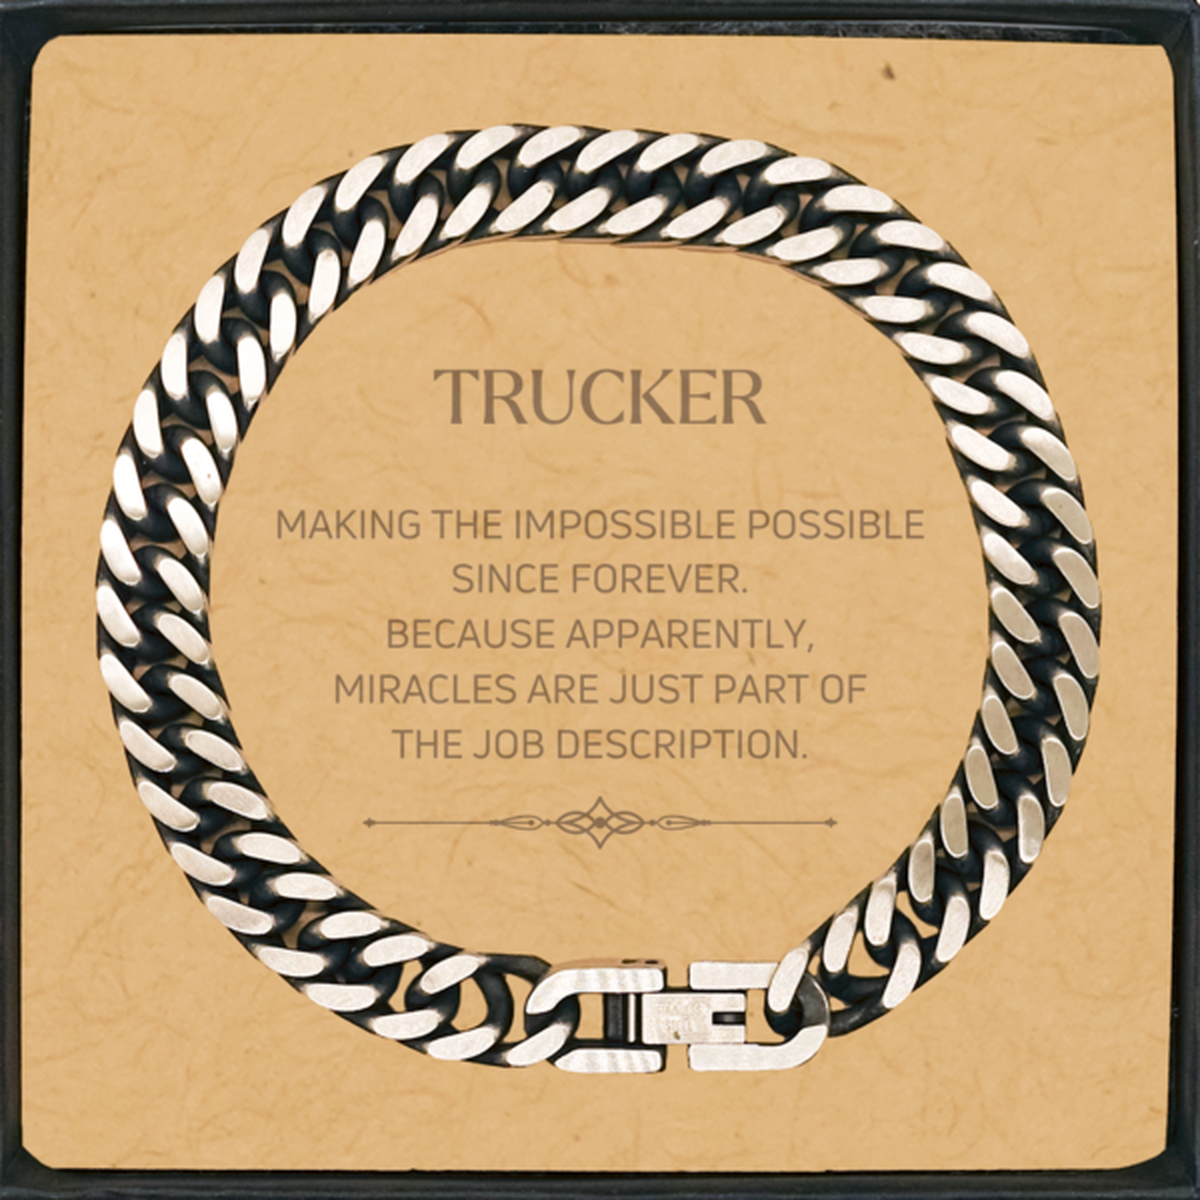 Funny Trucker Gifts, Miracles are just part of the job description, Inspirational Birthday Cuban Link Chain Bracelet For Trucker, Men, Women, Coworkers, Friends, Boss